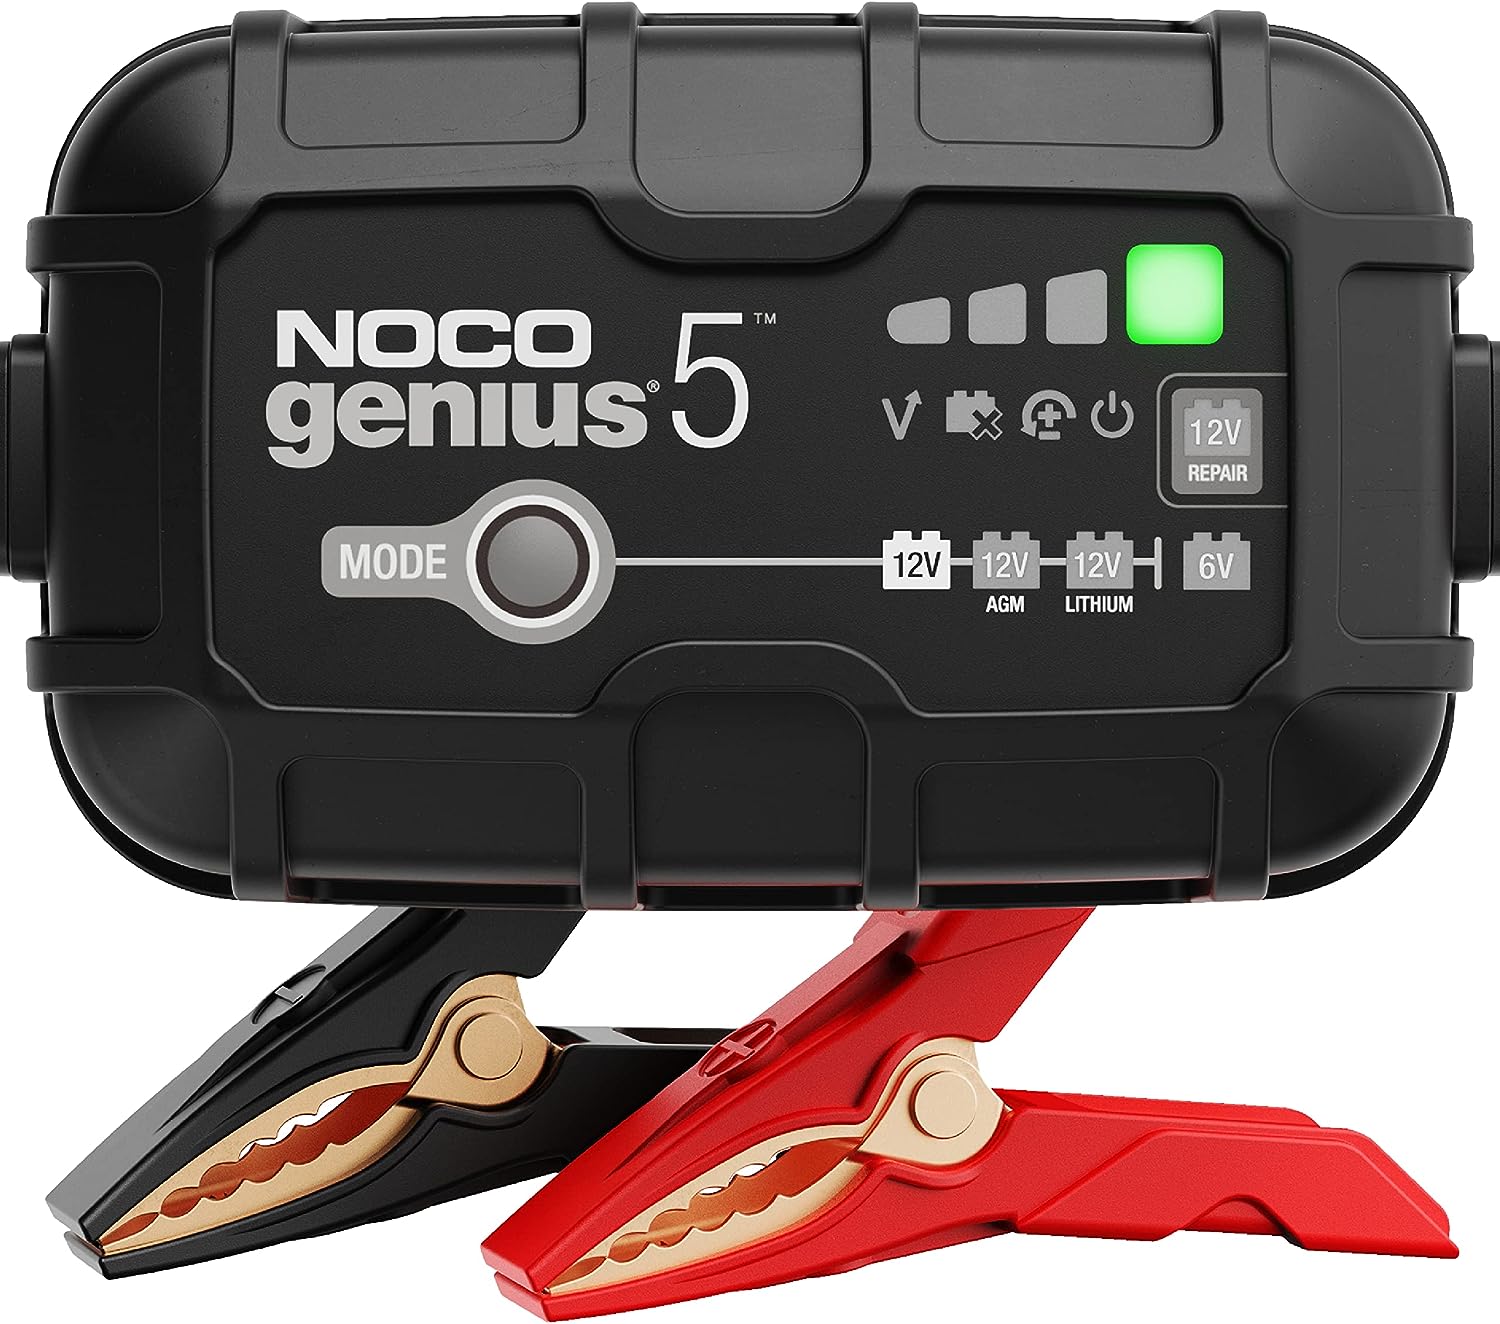 NOCO GENIUS5UK, 5A Car Battery Charger, 6V and 12V Portable Smart Charger-0229